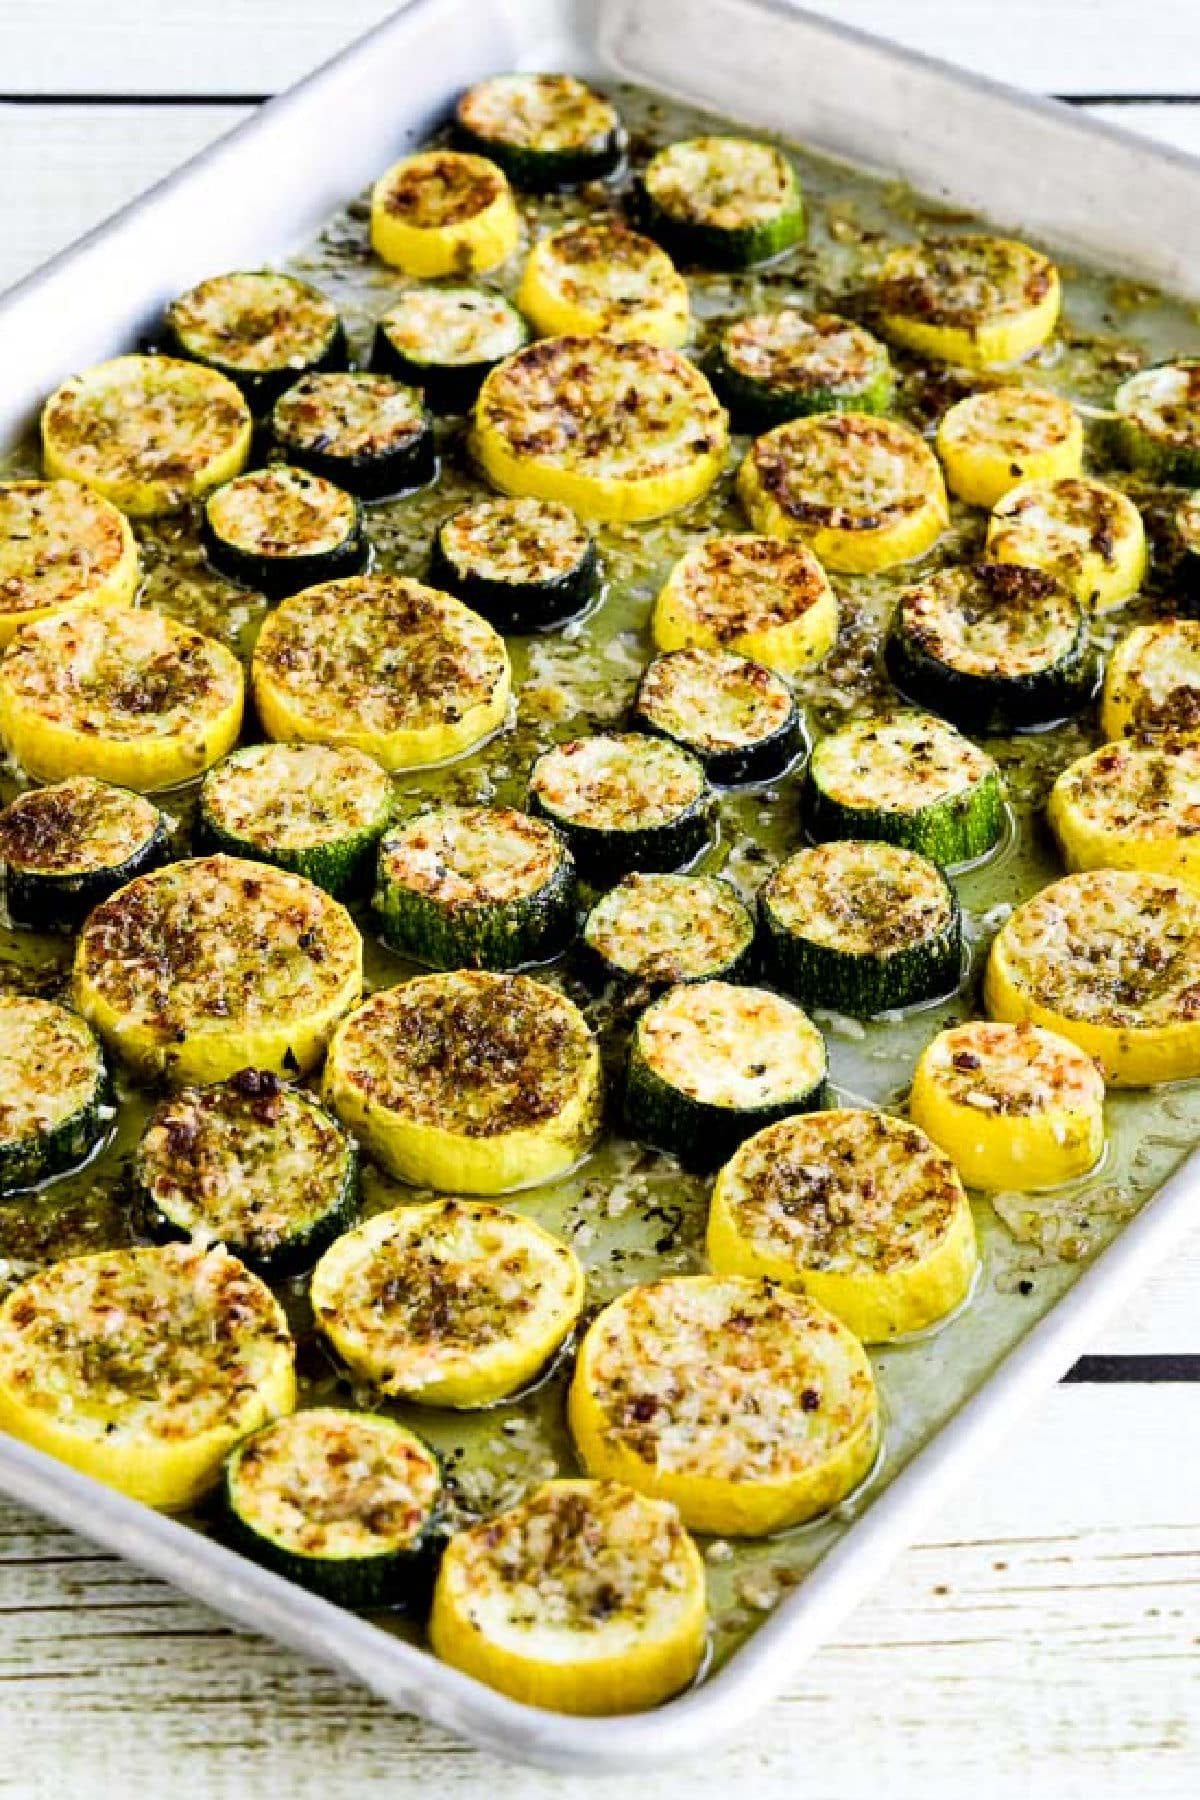 Summer squash with pesto and parmesan displayed on the baking tray